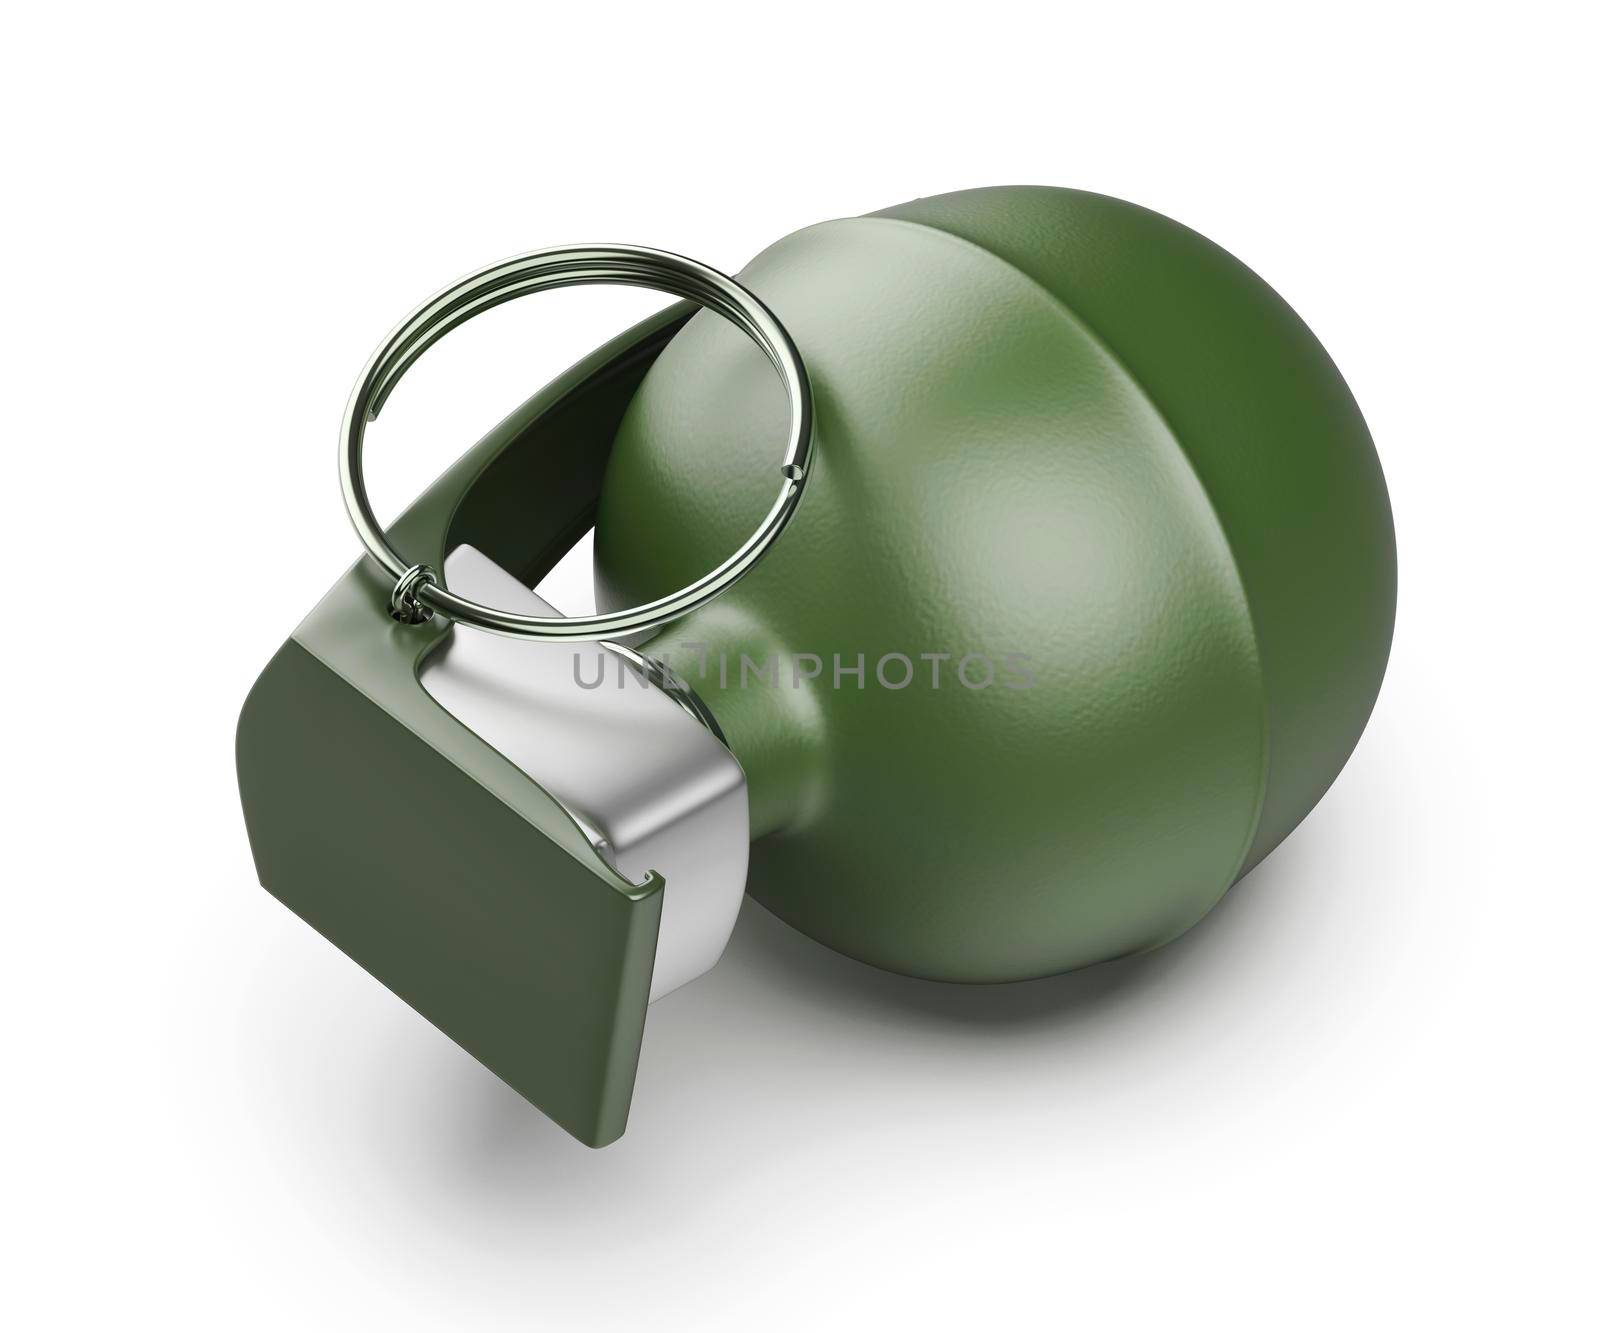 Hand grenade by magraphics